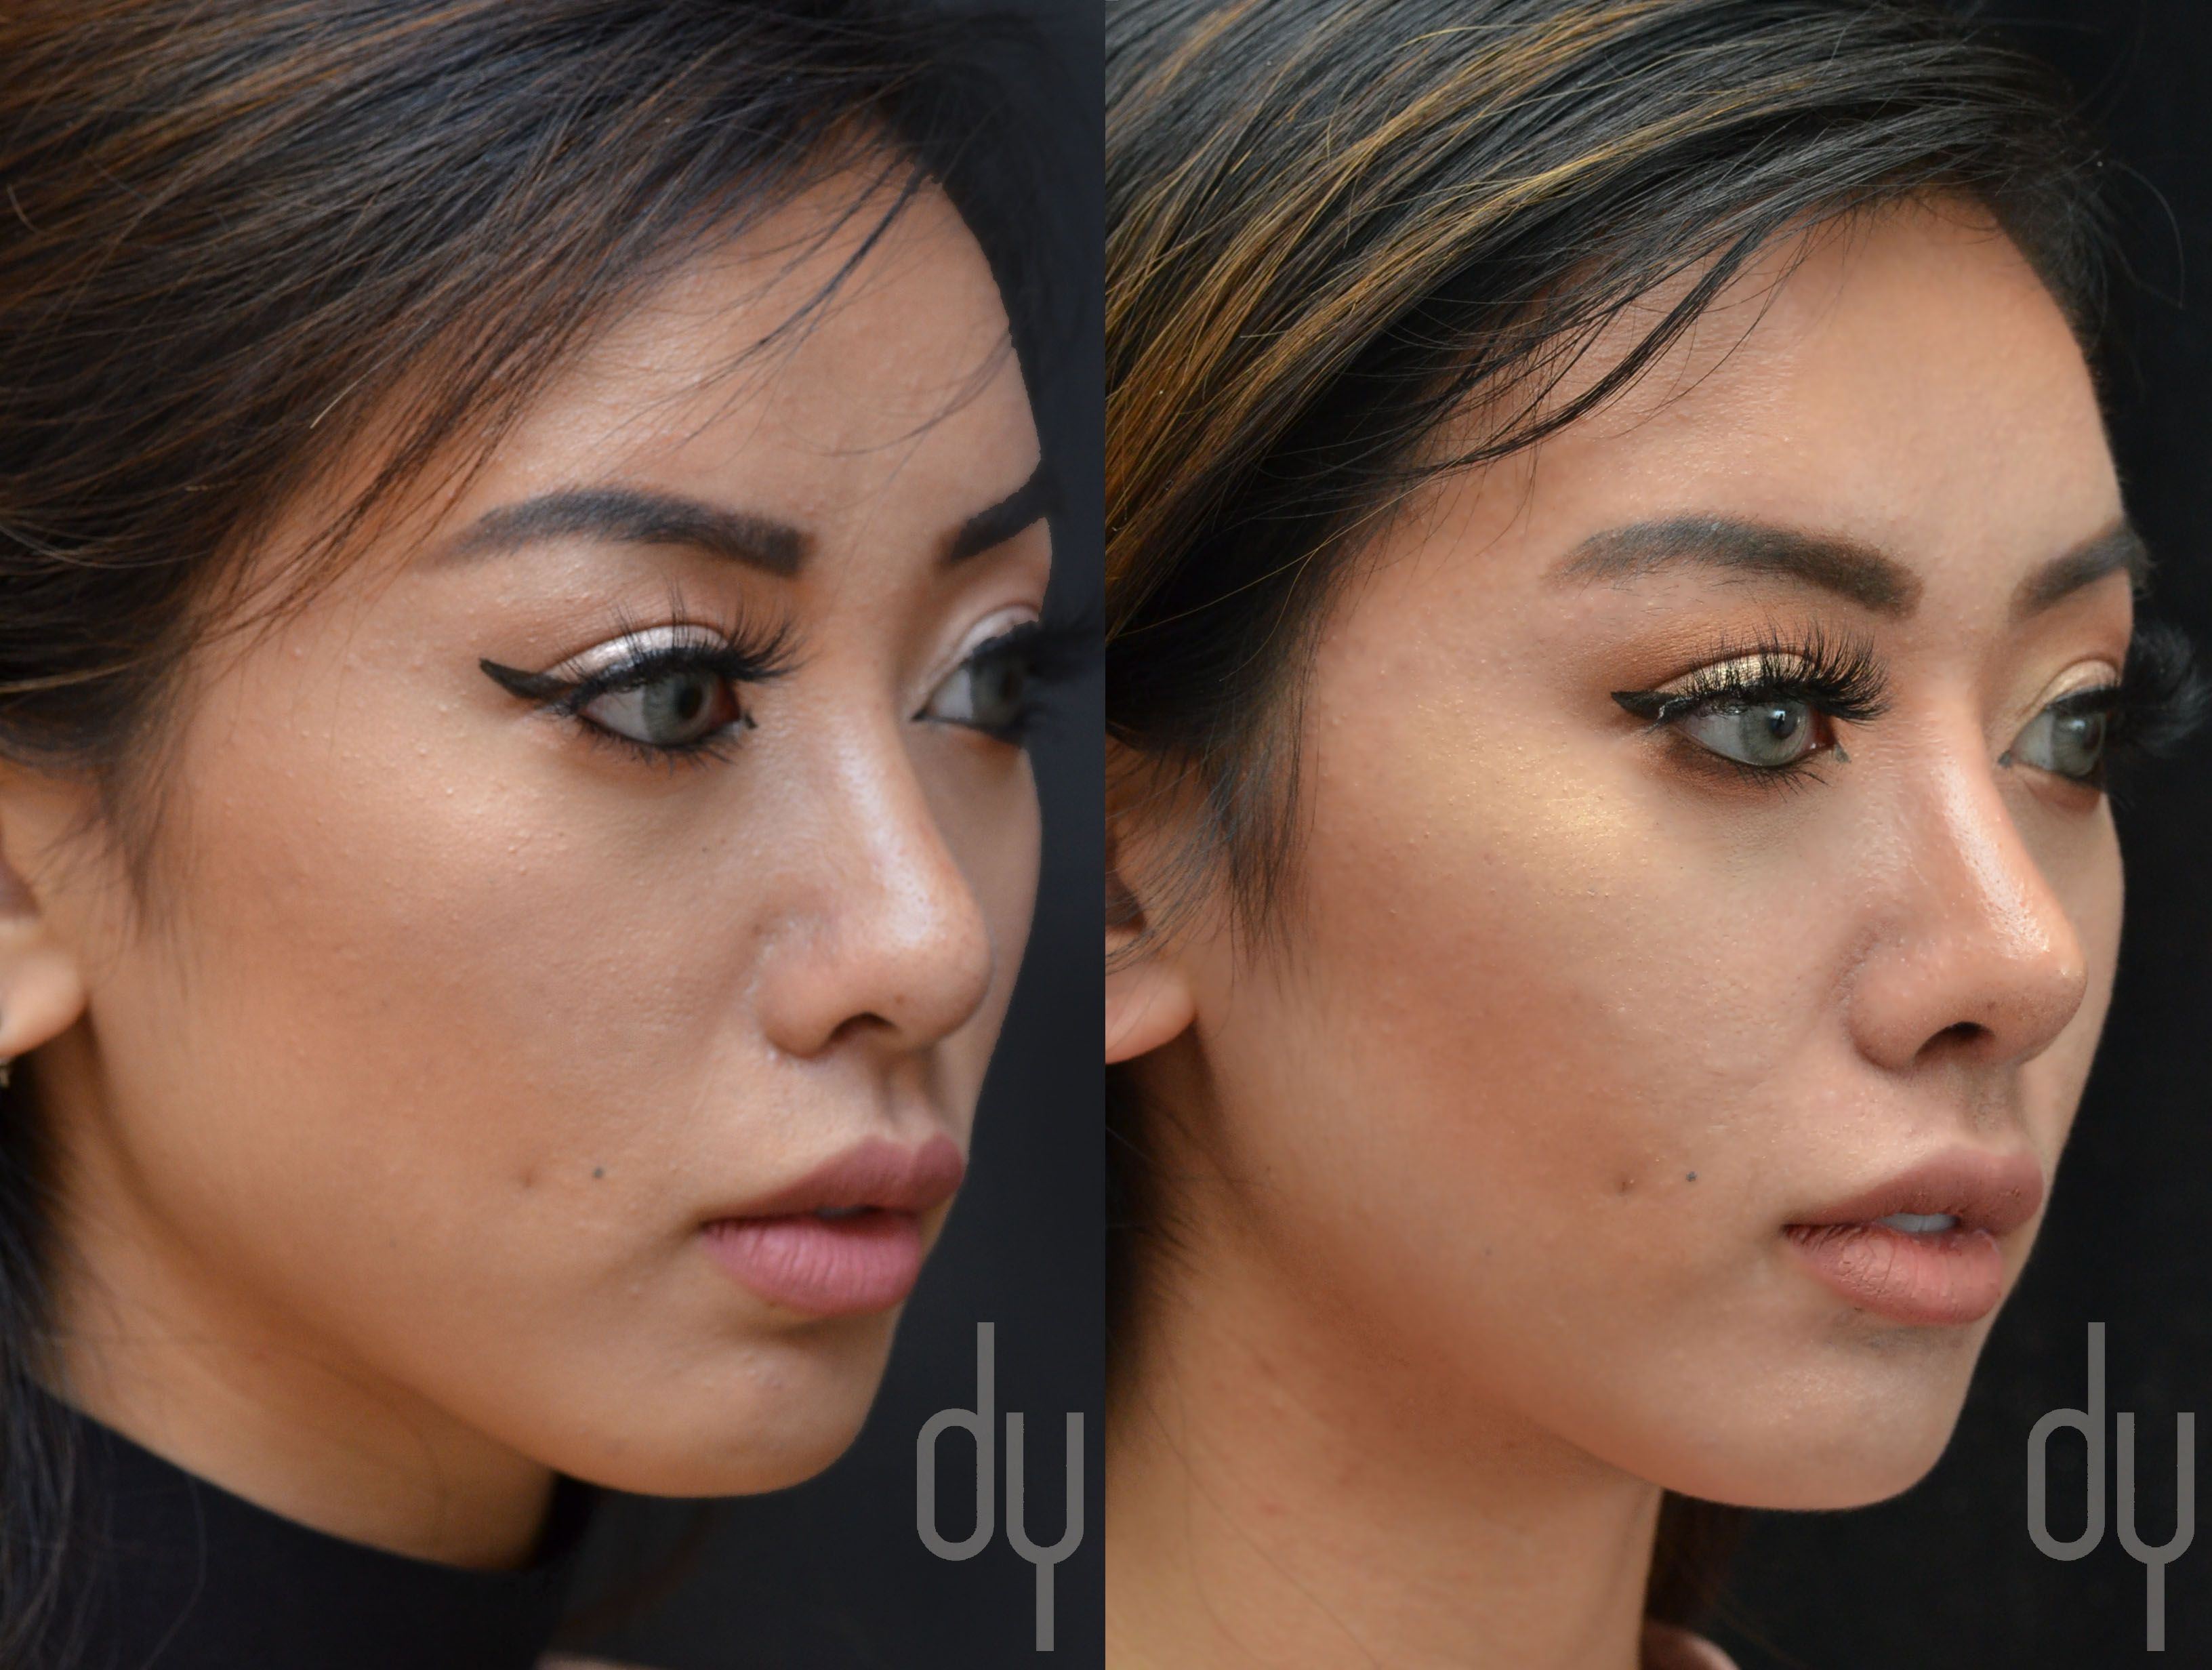 Asian rhinoplasty before and after pictures